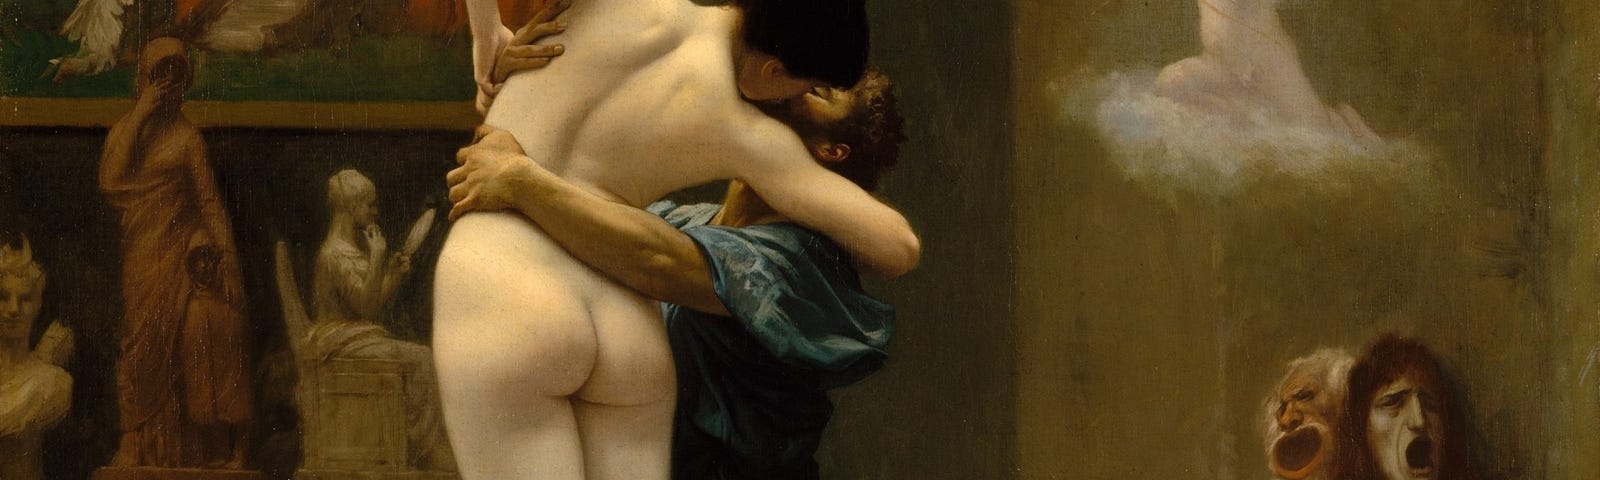 Pygmalion and Galatea by Jean-Leon Gerome (1890) source https://www.tumblr.com/the-evil-clergyman